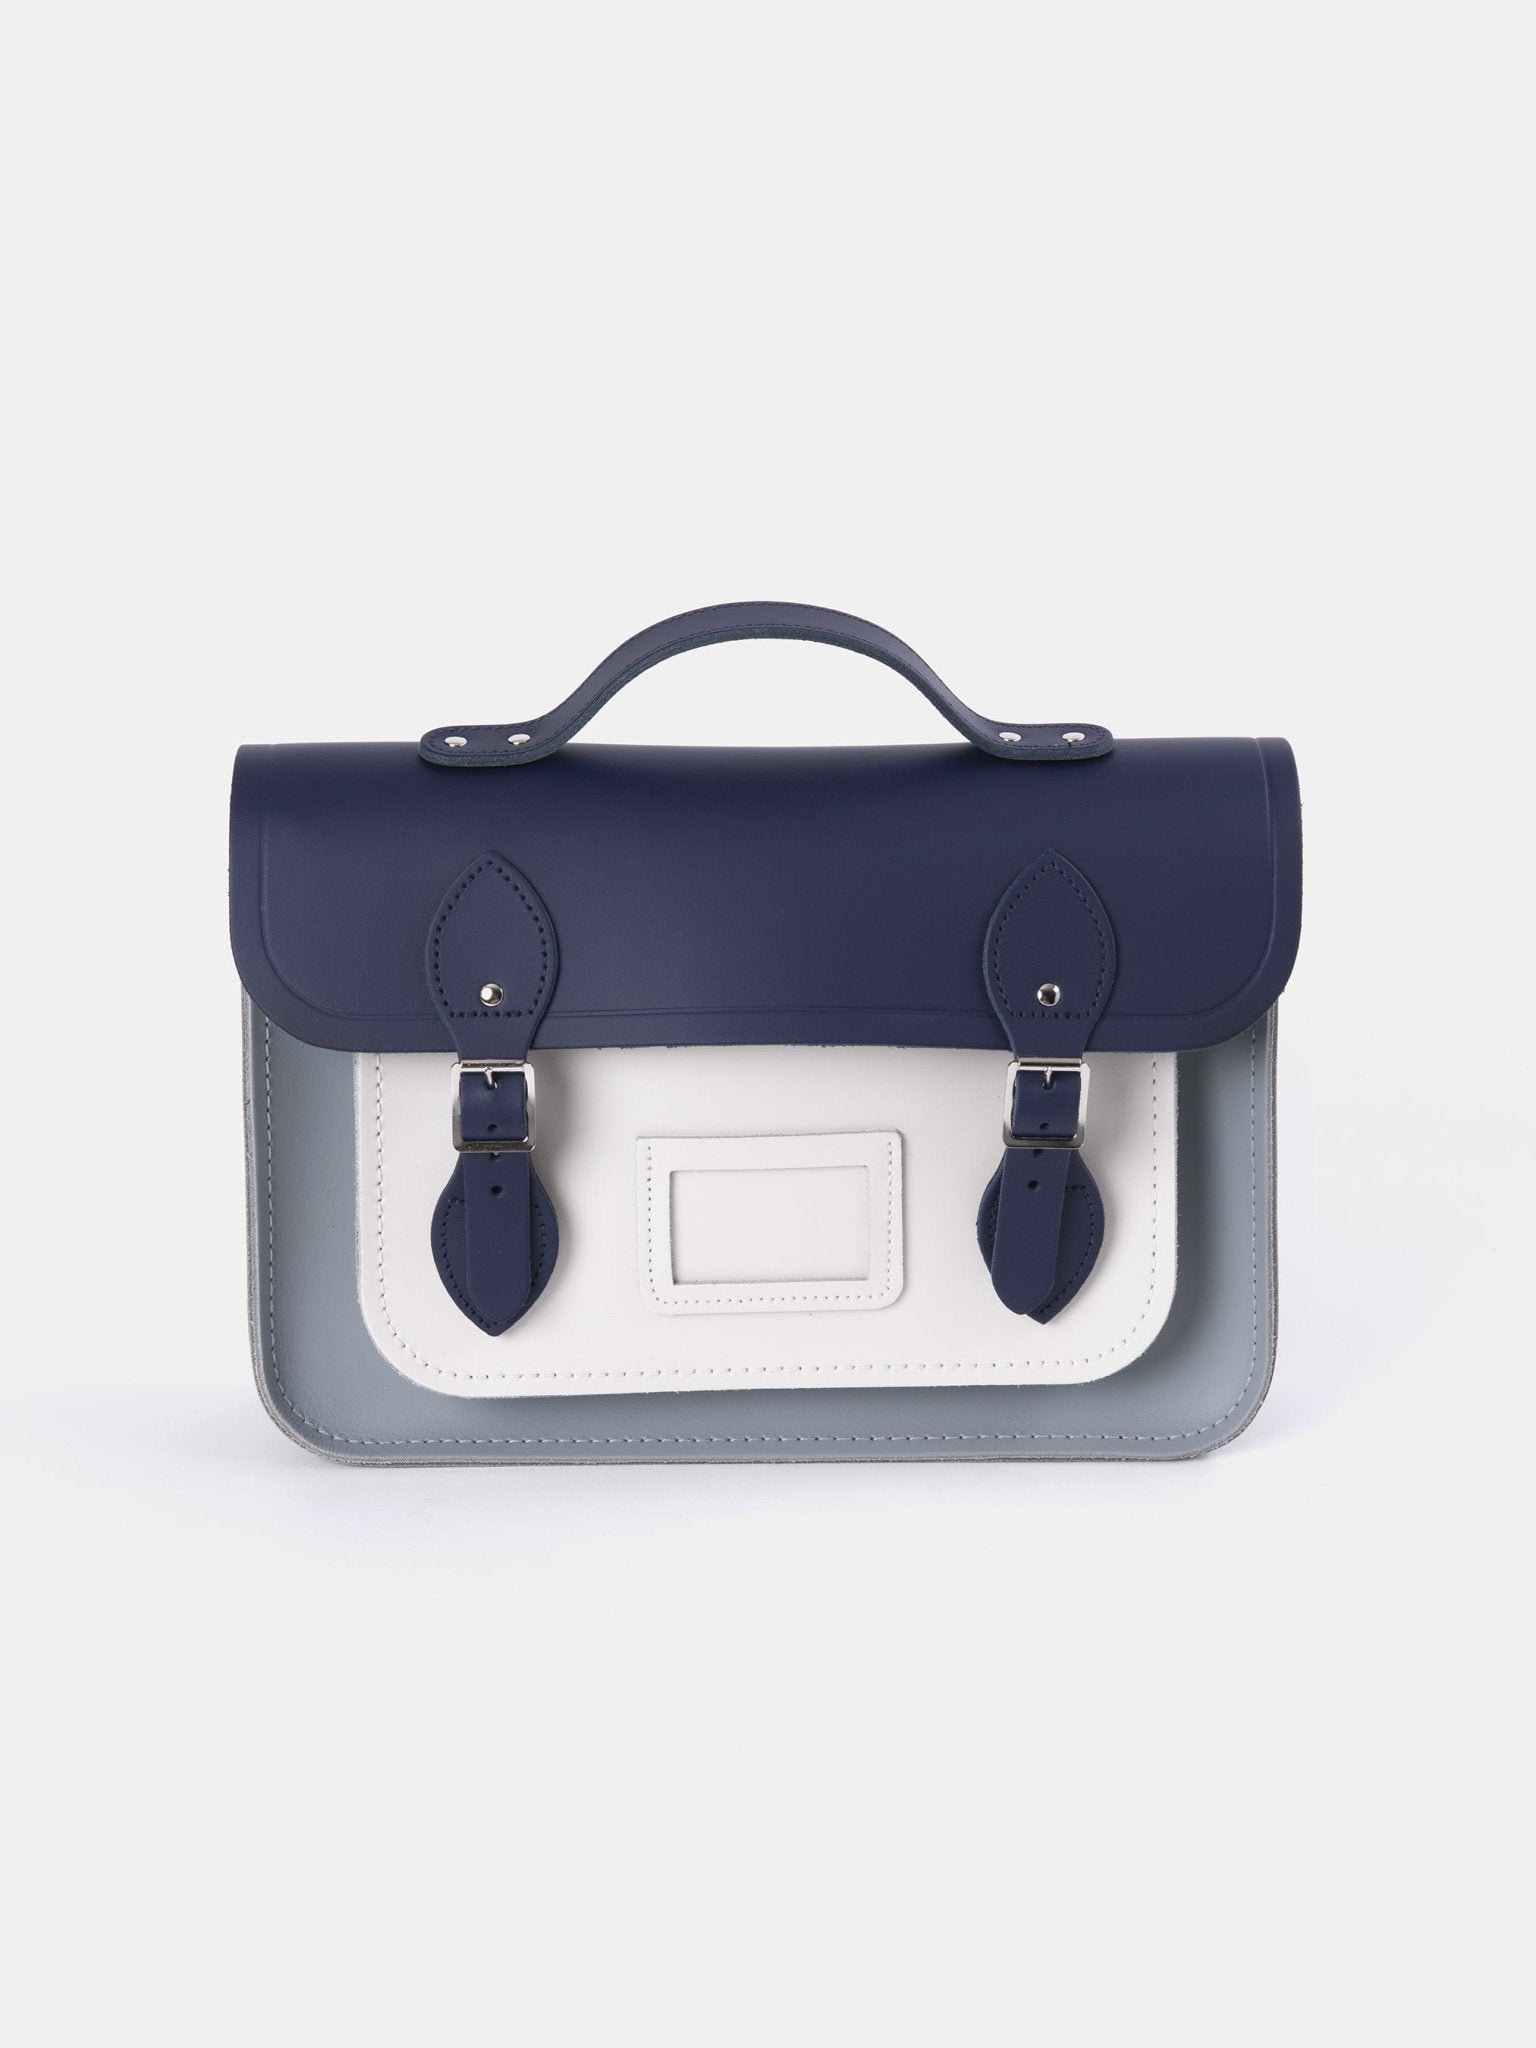 The 13 Inch Batchel - Midnight Picnic Matte, French Grey & Clay - The Cambridge Satchel Company US Store